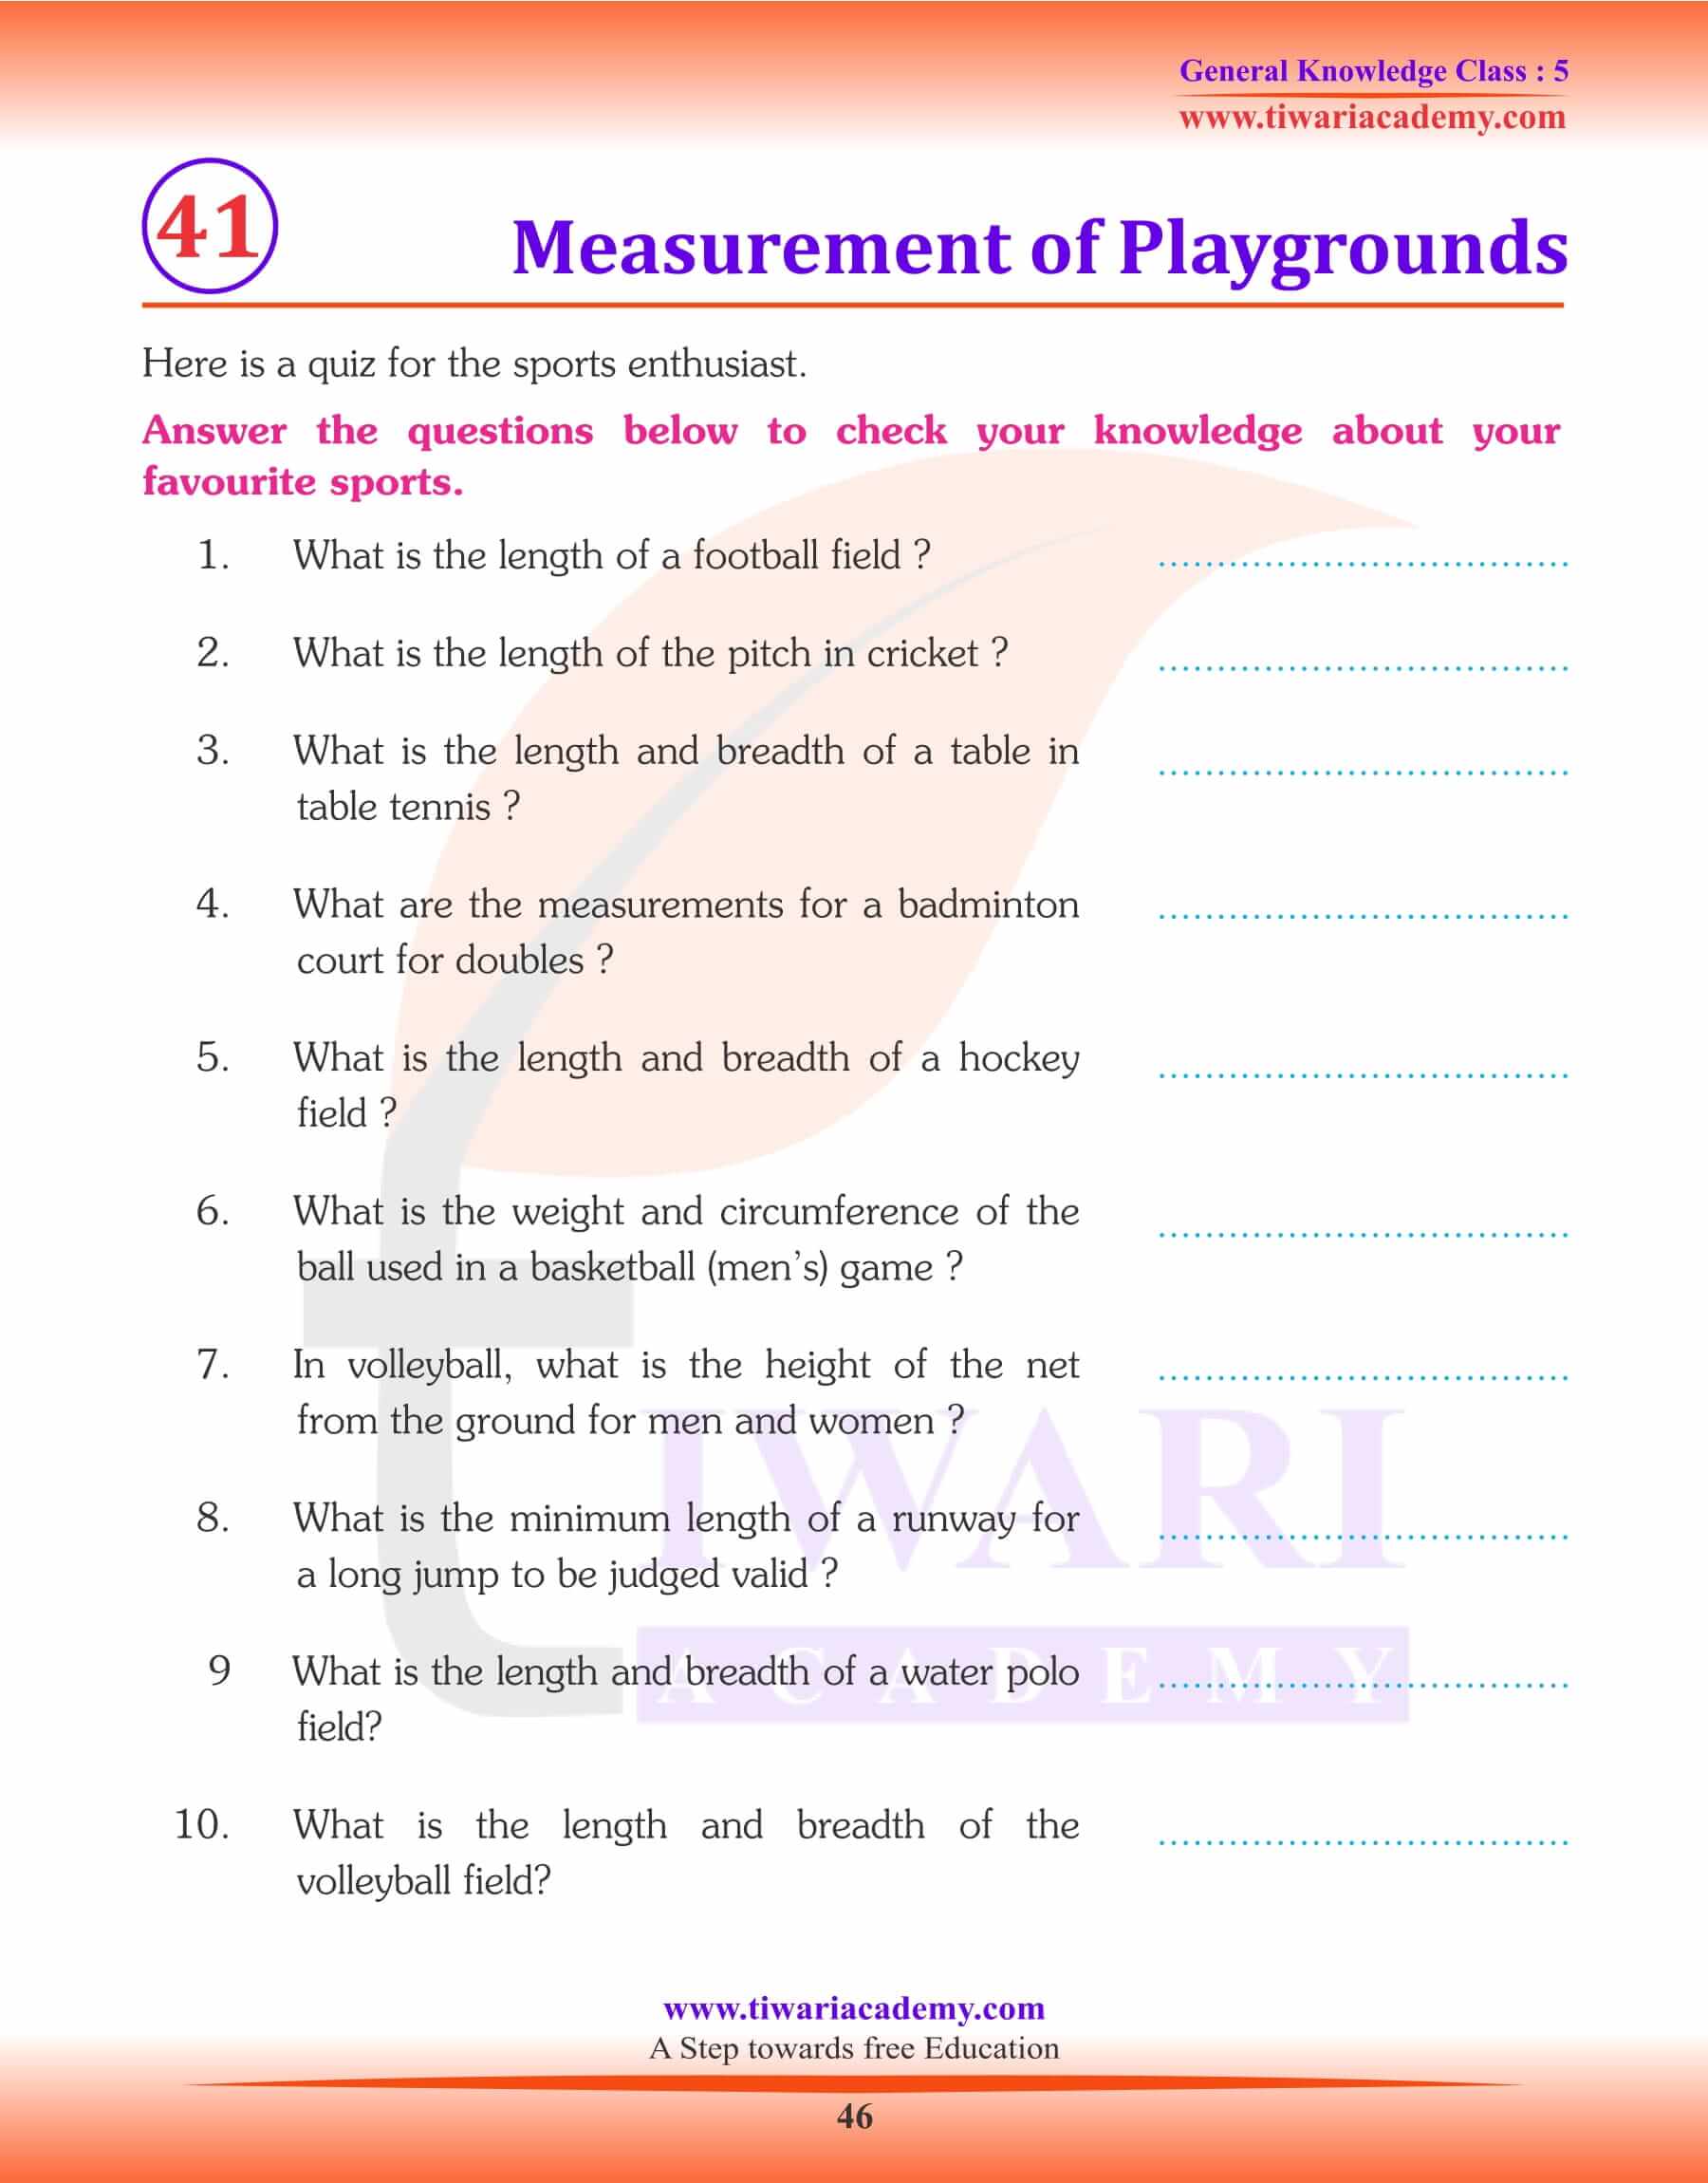 Measurements of Playgrounds